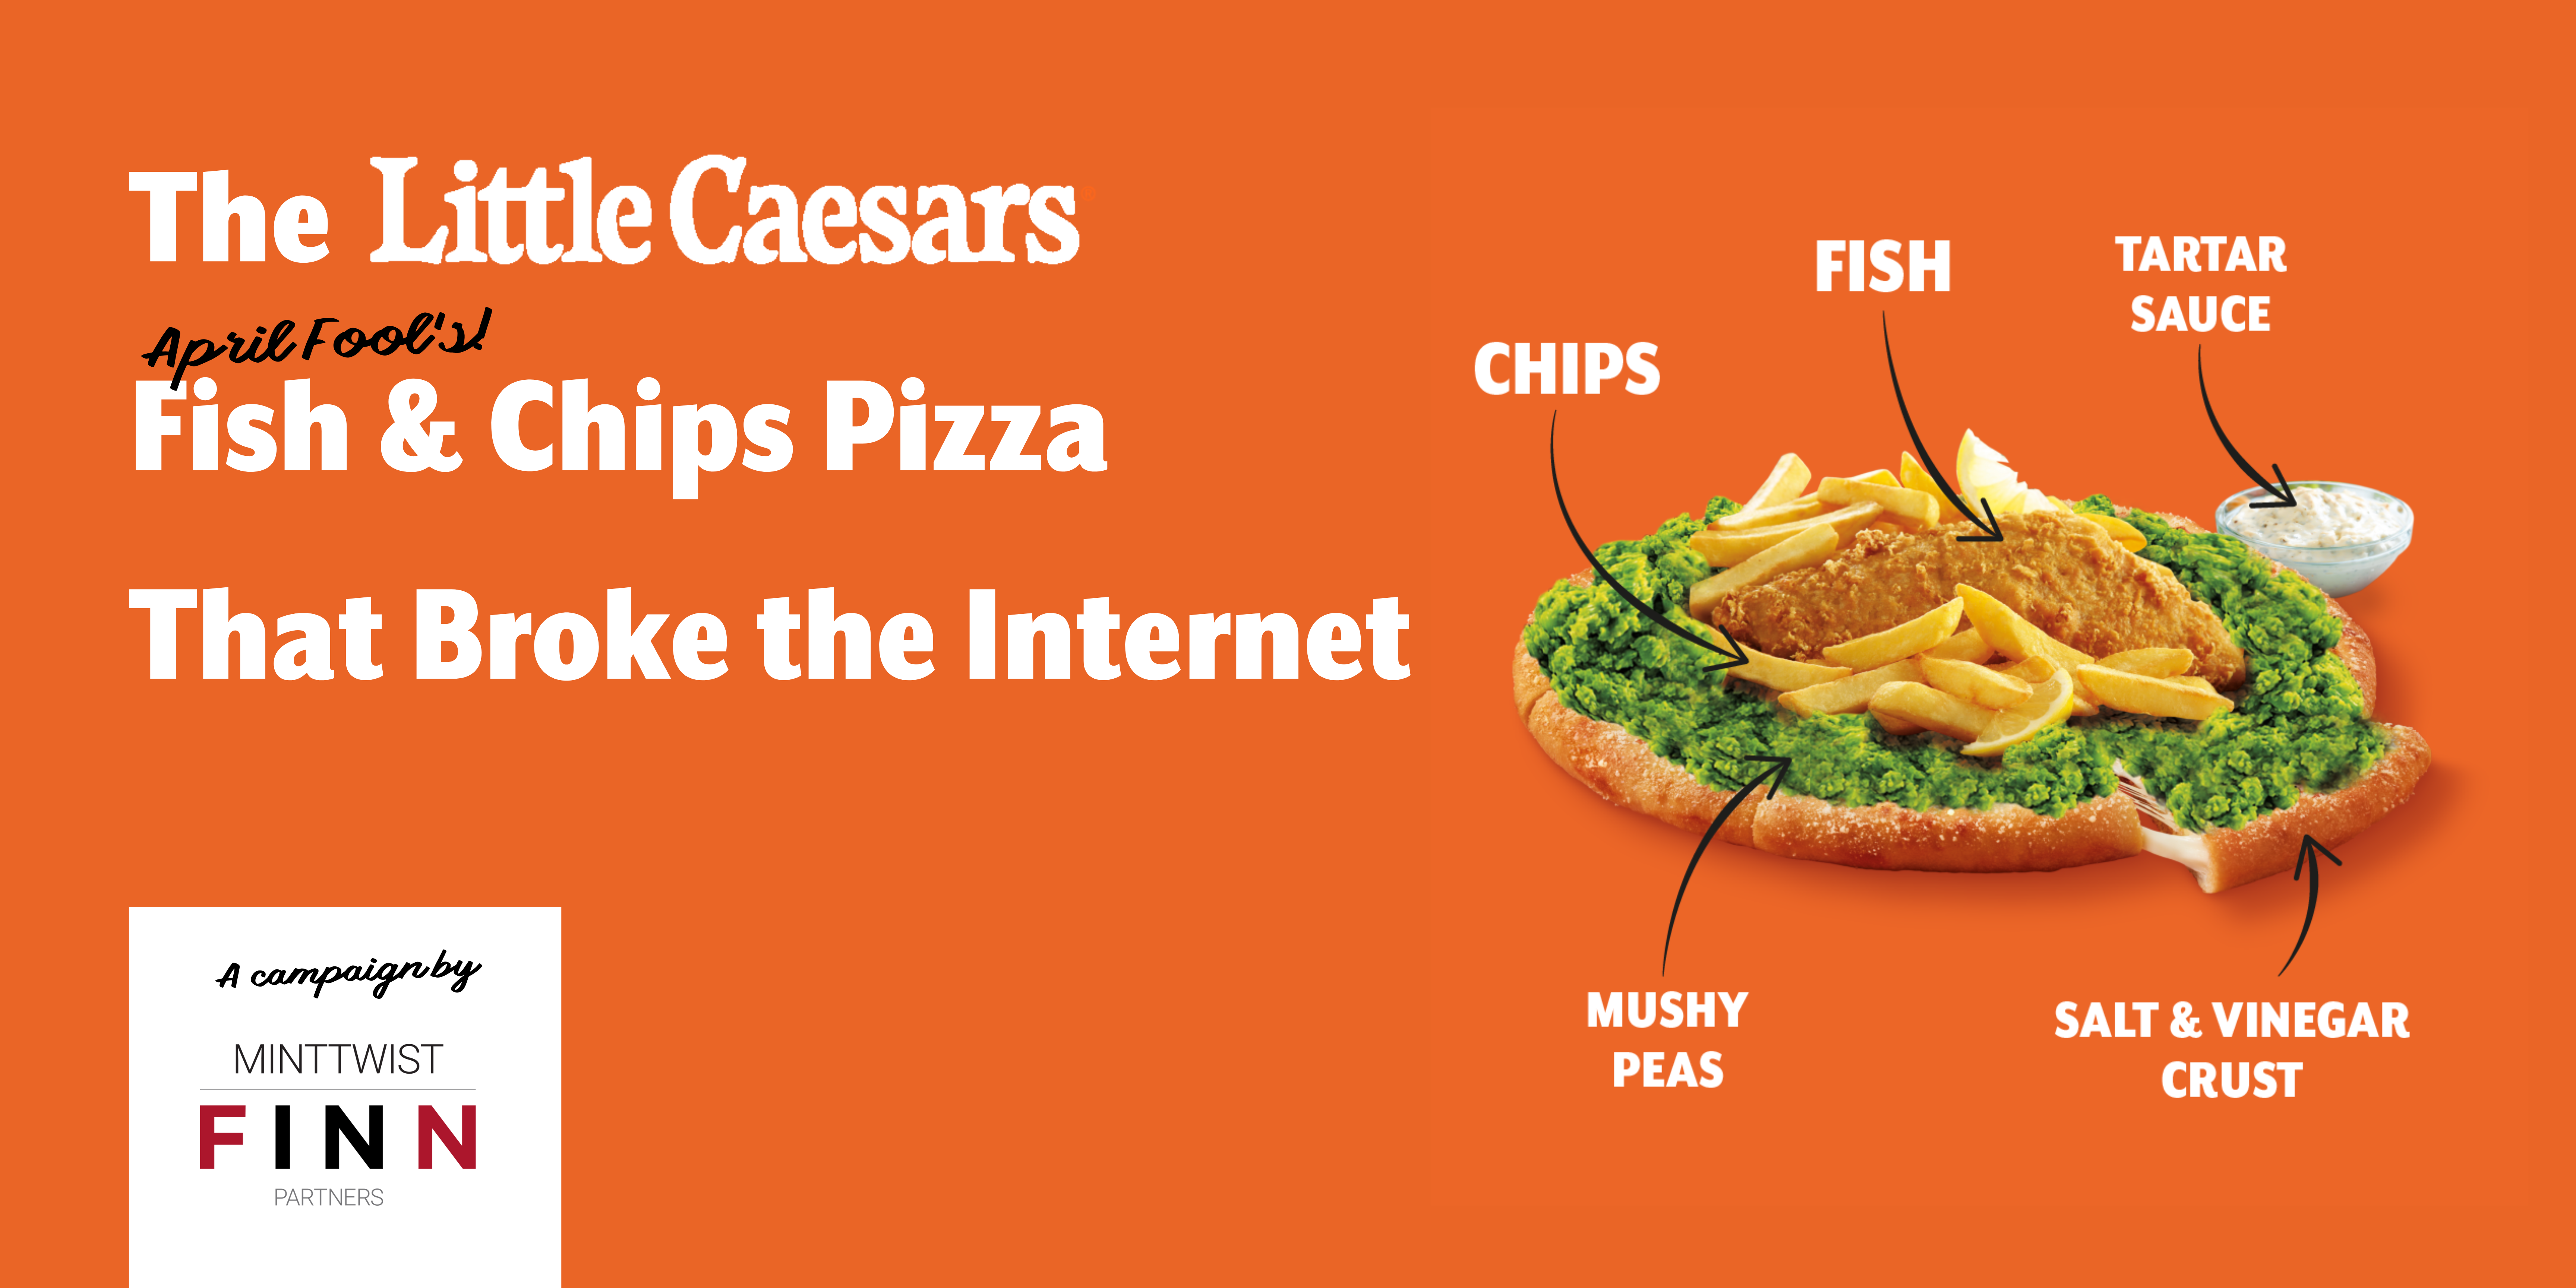 Image: MintTwist (FINN Partners) shortlisted twice in the UK Social Media Awards for their quirky April Fool’s campaign with Little Caesars